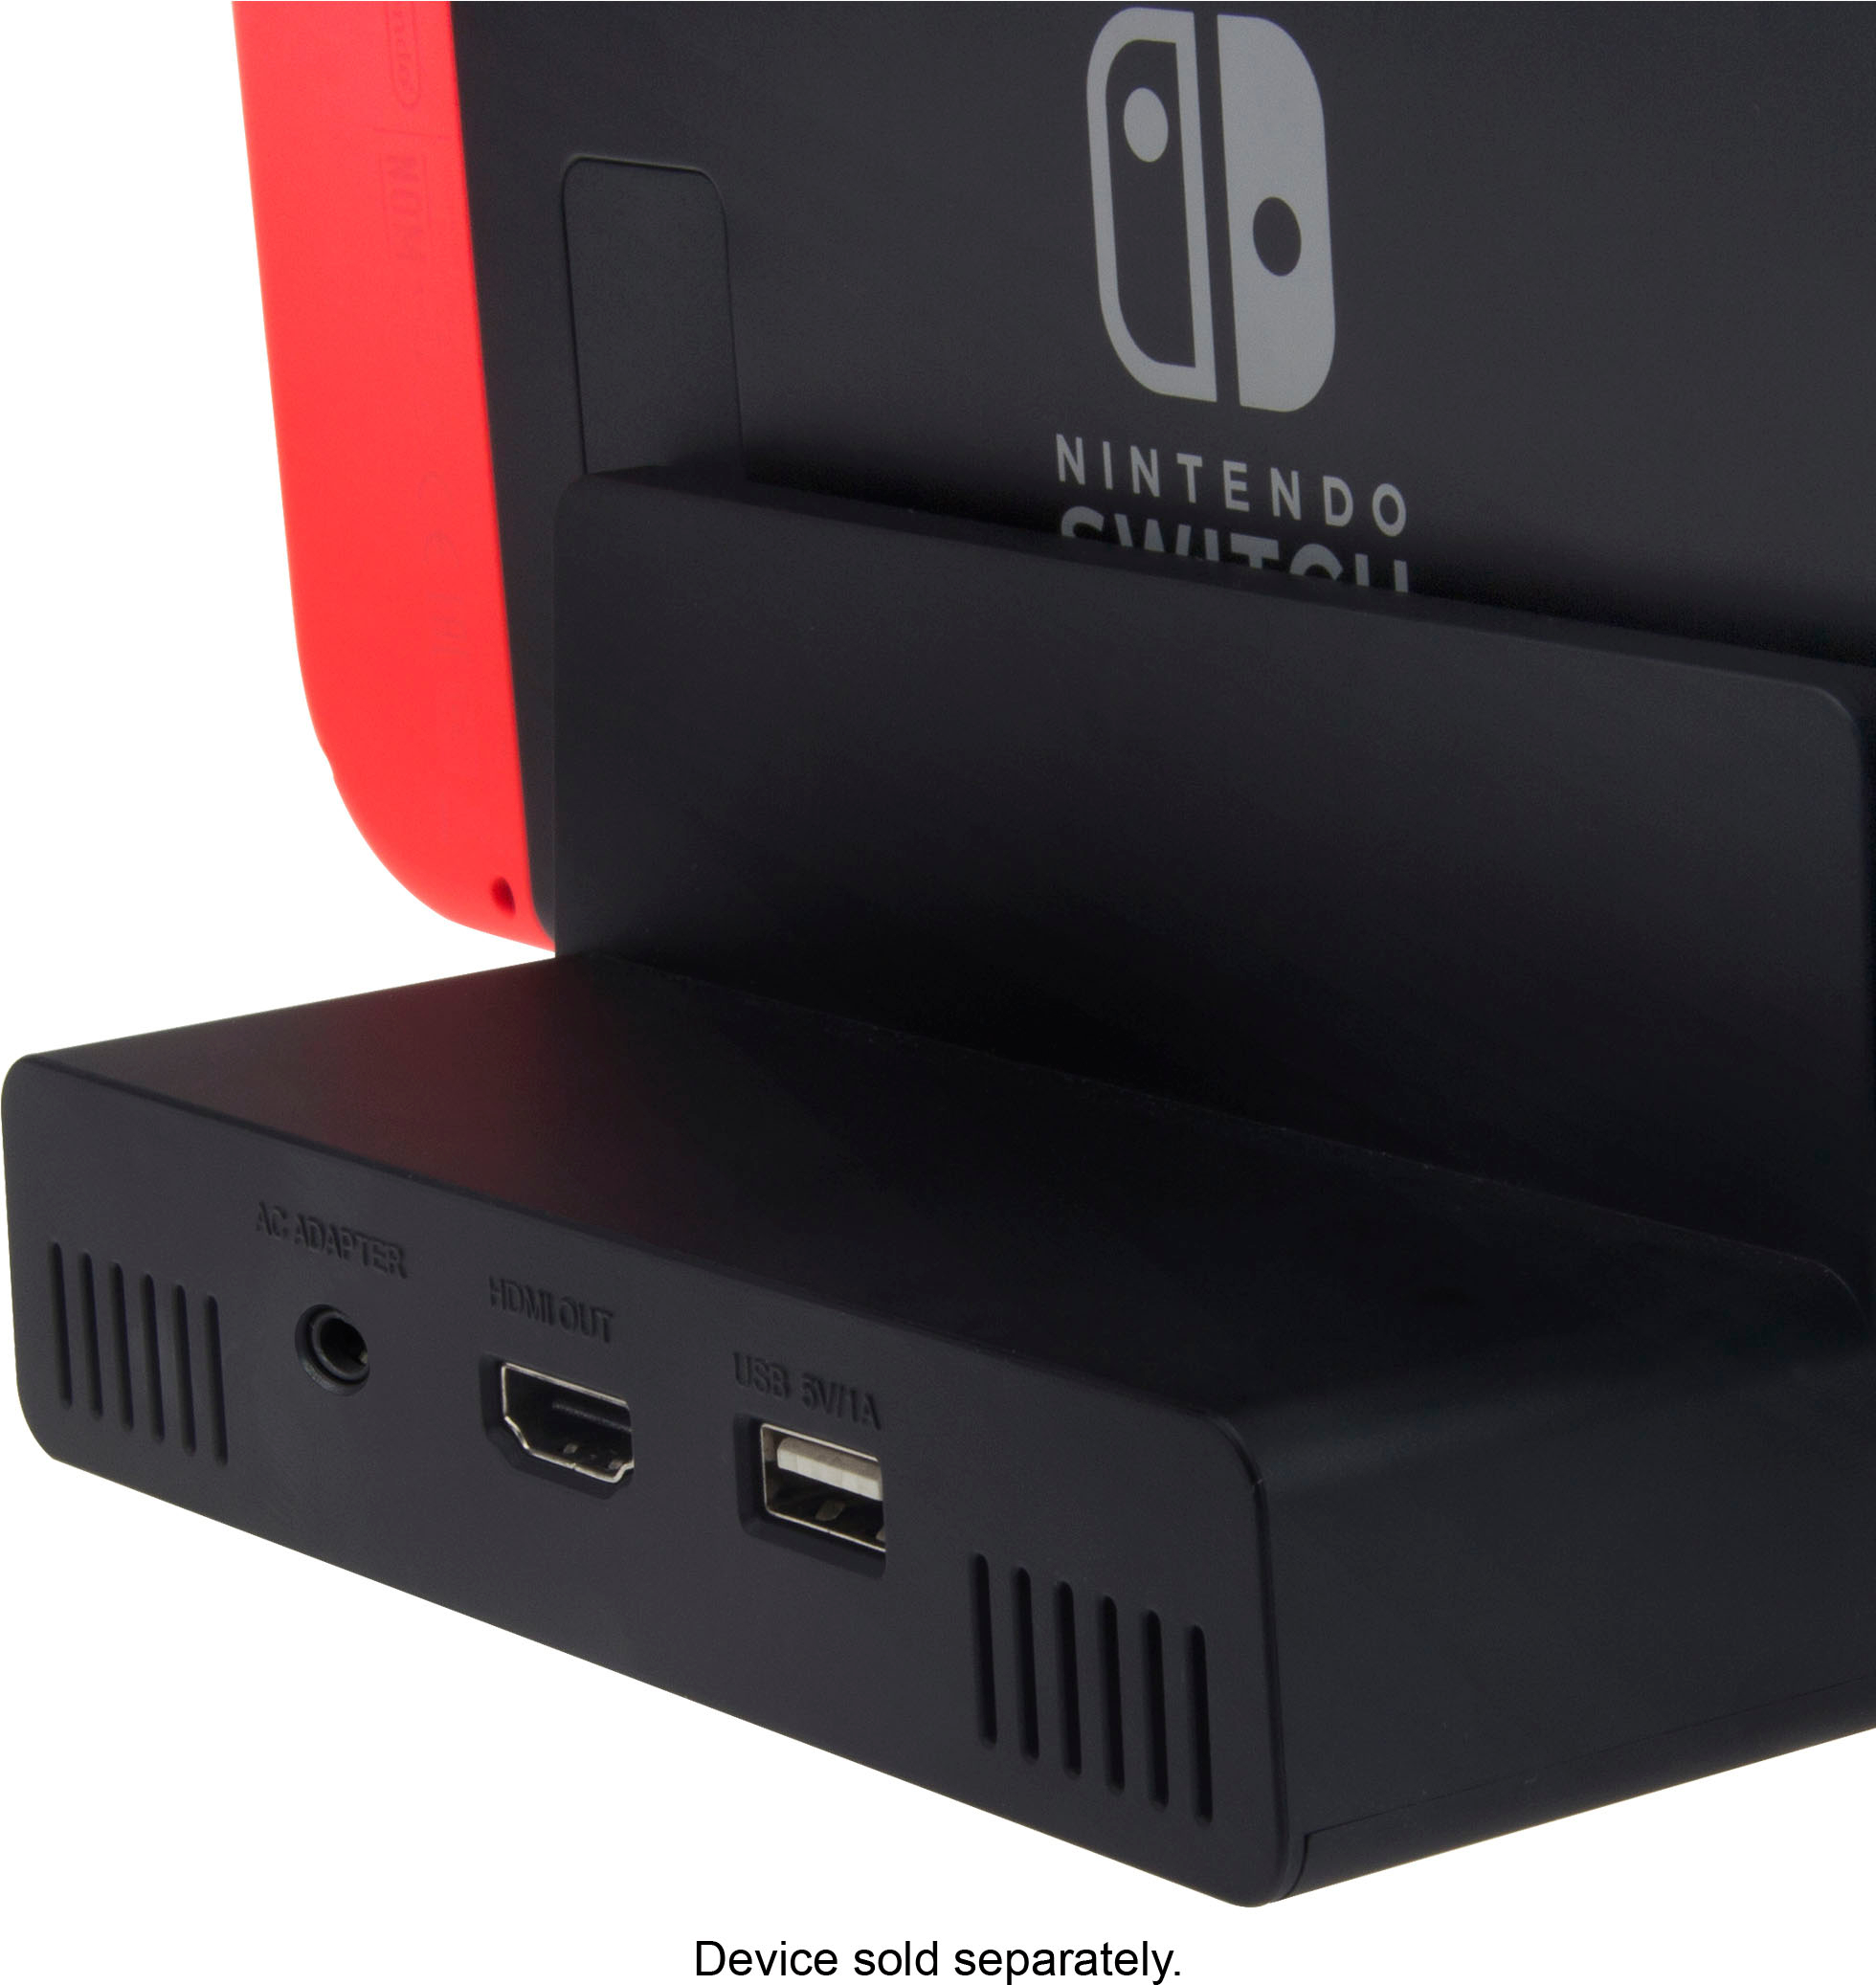 How to Hide Nintendo Switch Online Status - Ask About Tech